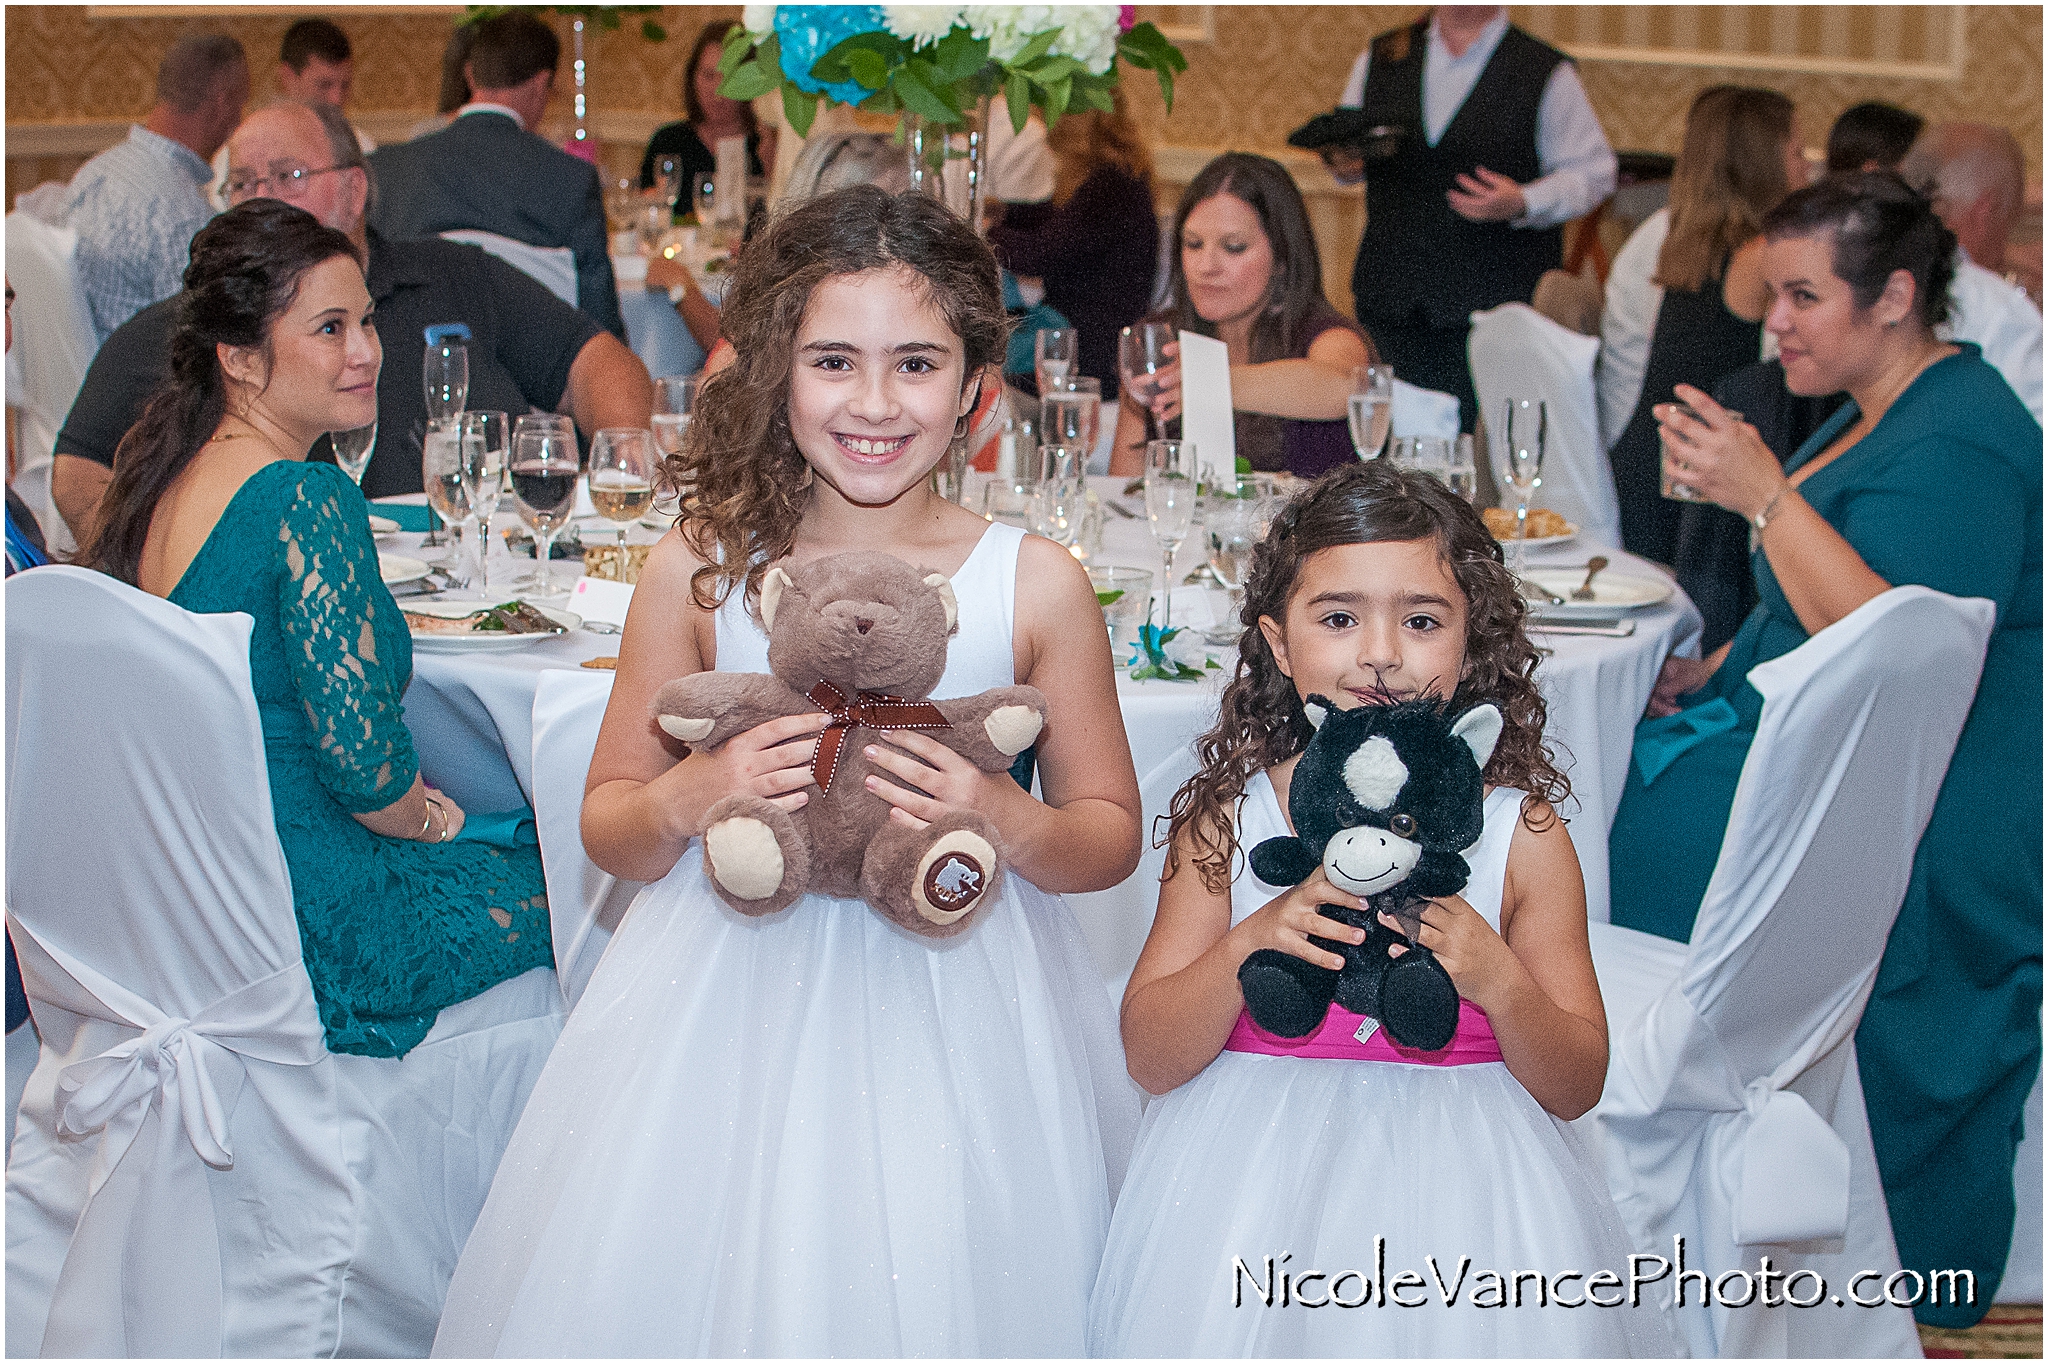 The flower girls and their special gifts from the groom.